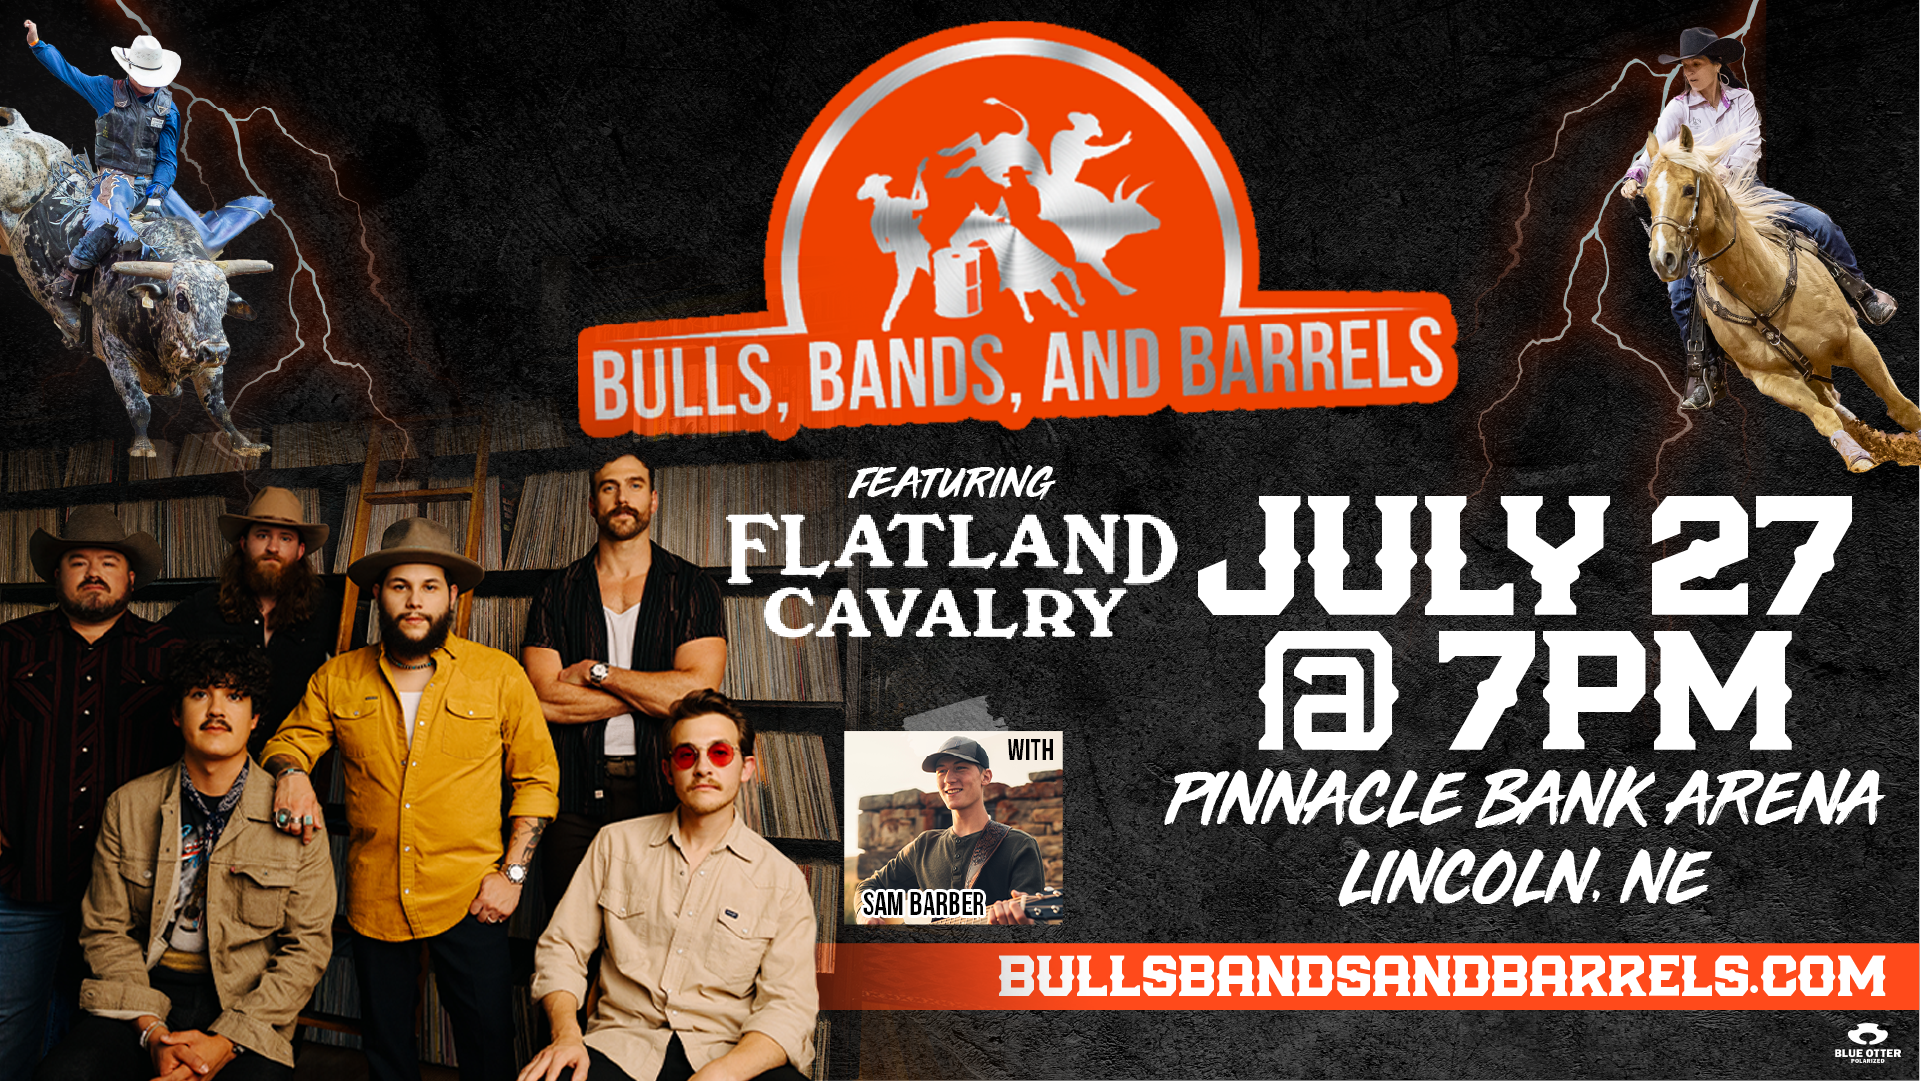 <h1 class="tribe-events-single-event-title">Bulls, Bands, and Barrels @ PBA</h1>